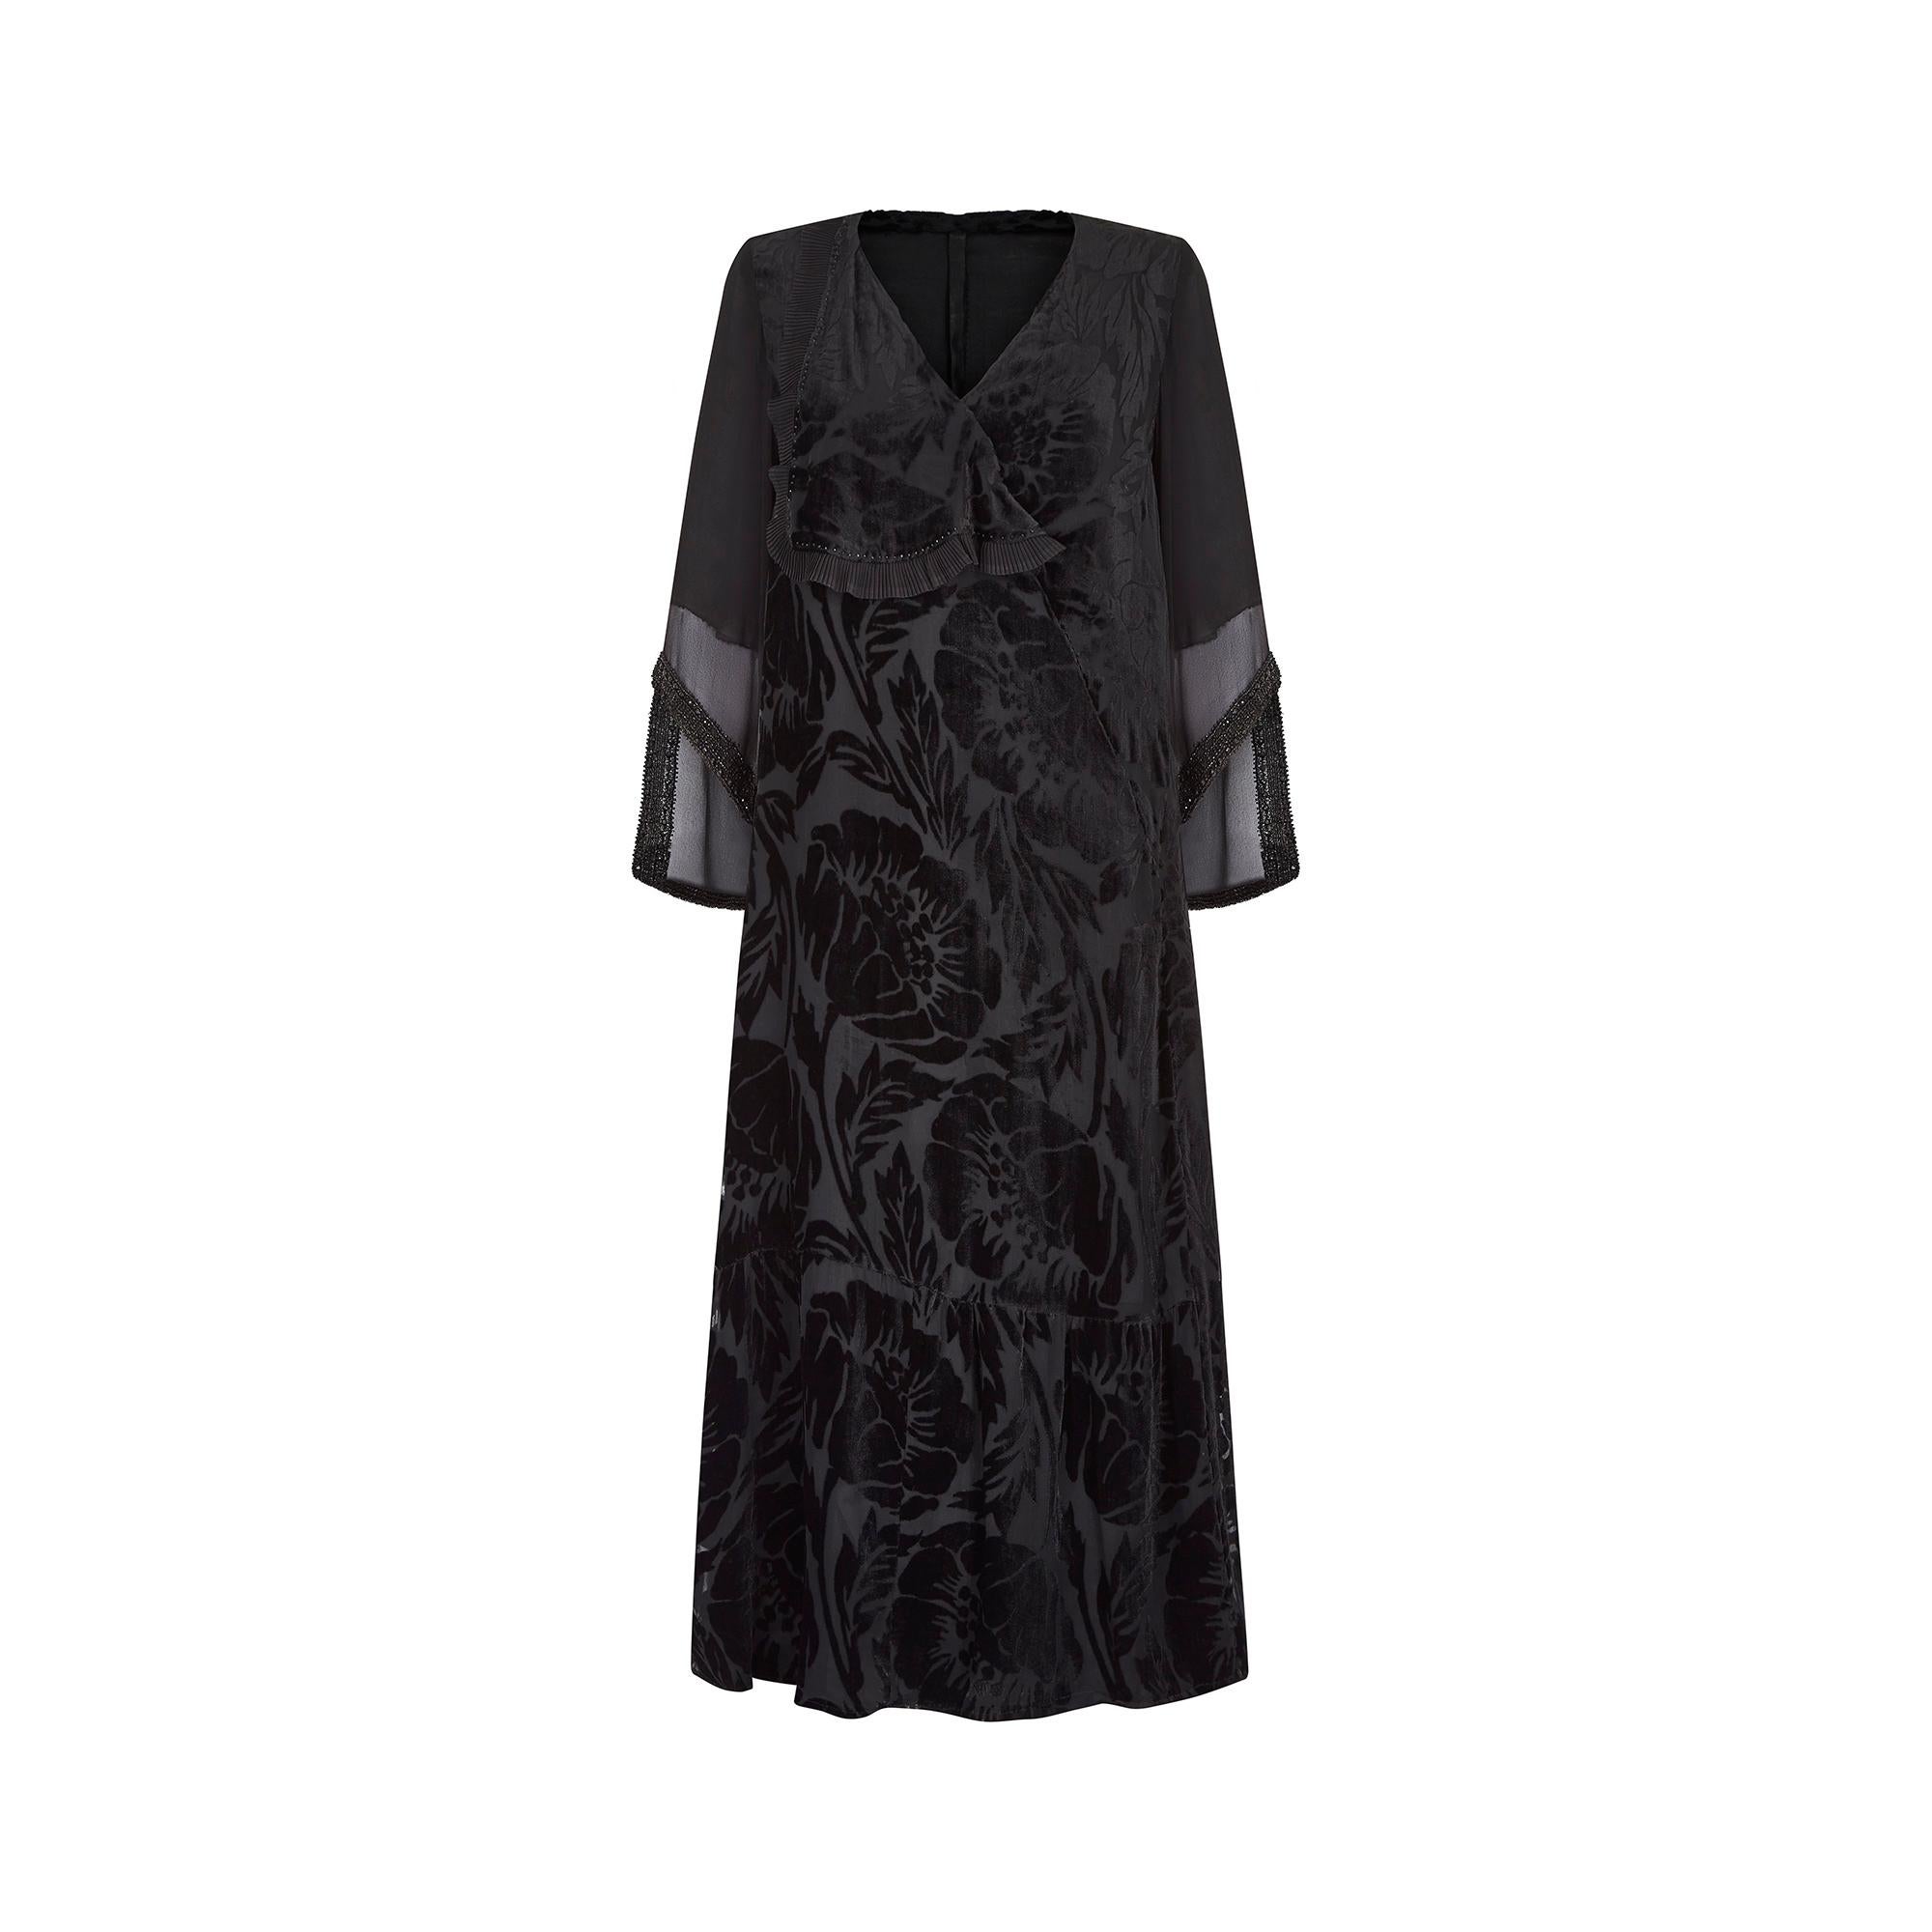 Black velvet and silk 1930s dress with a V-neck crossover front and frilled mesh trim finished with delicate beading. The dress has silk georgette fluted sleeves which are semi transparent and finished with further intricate black beaded detail to